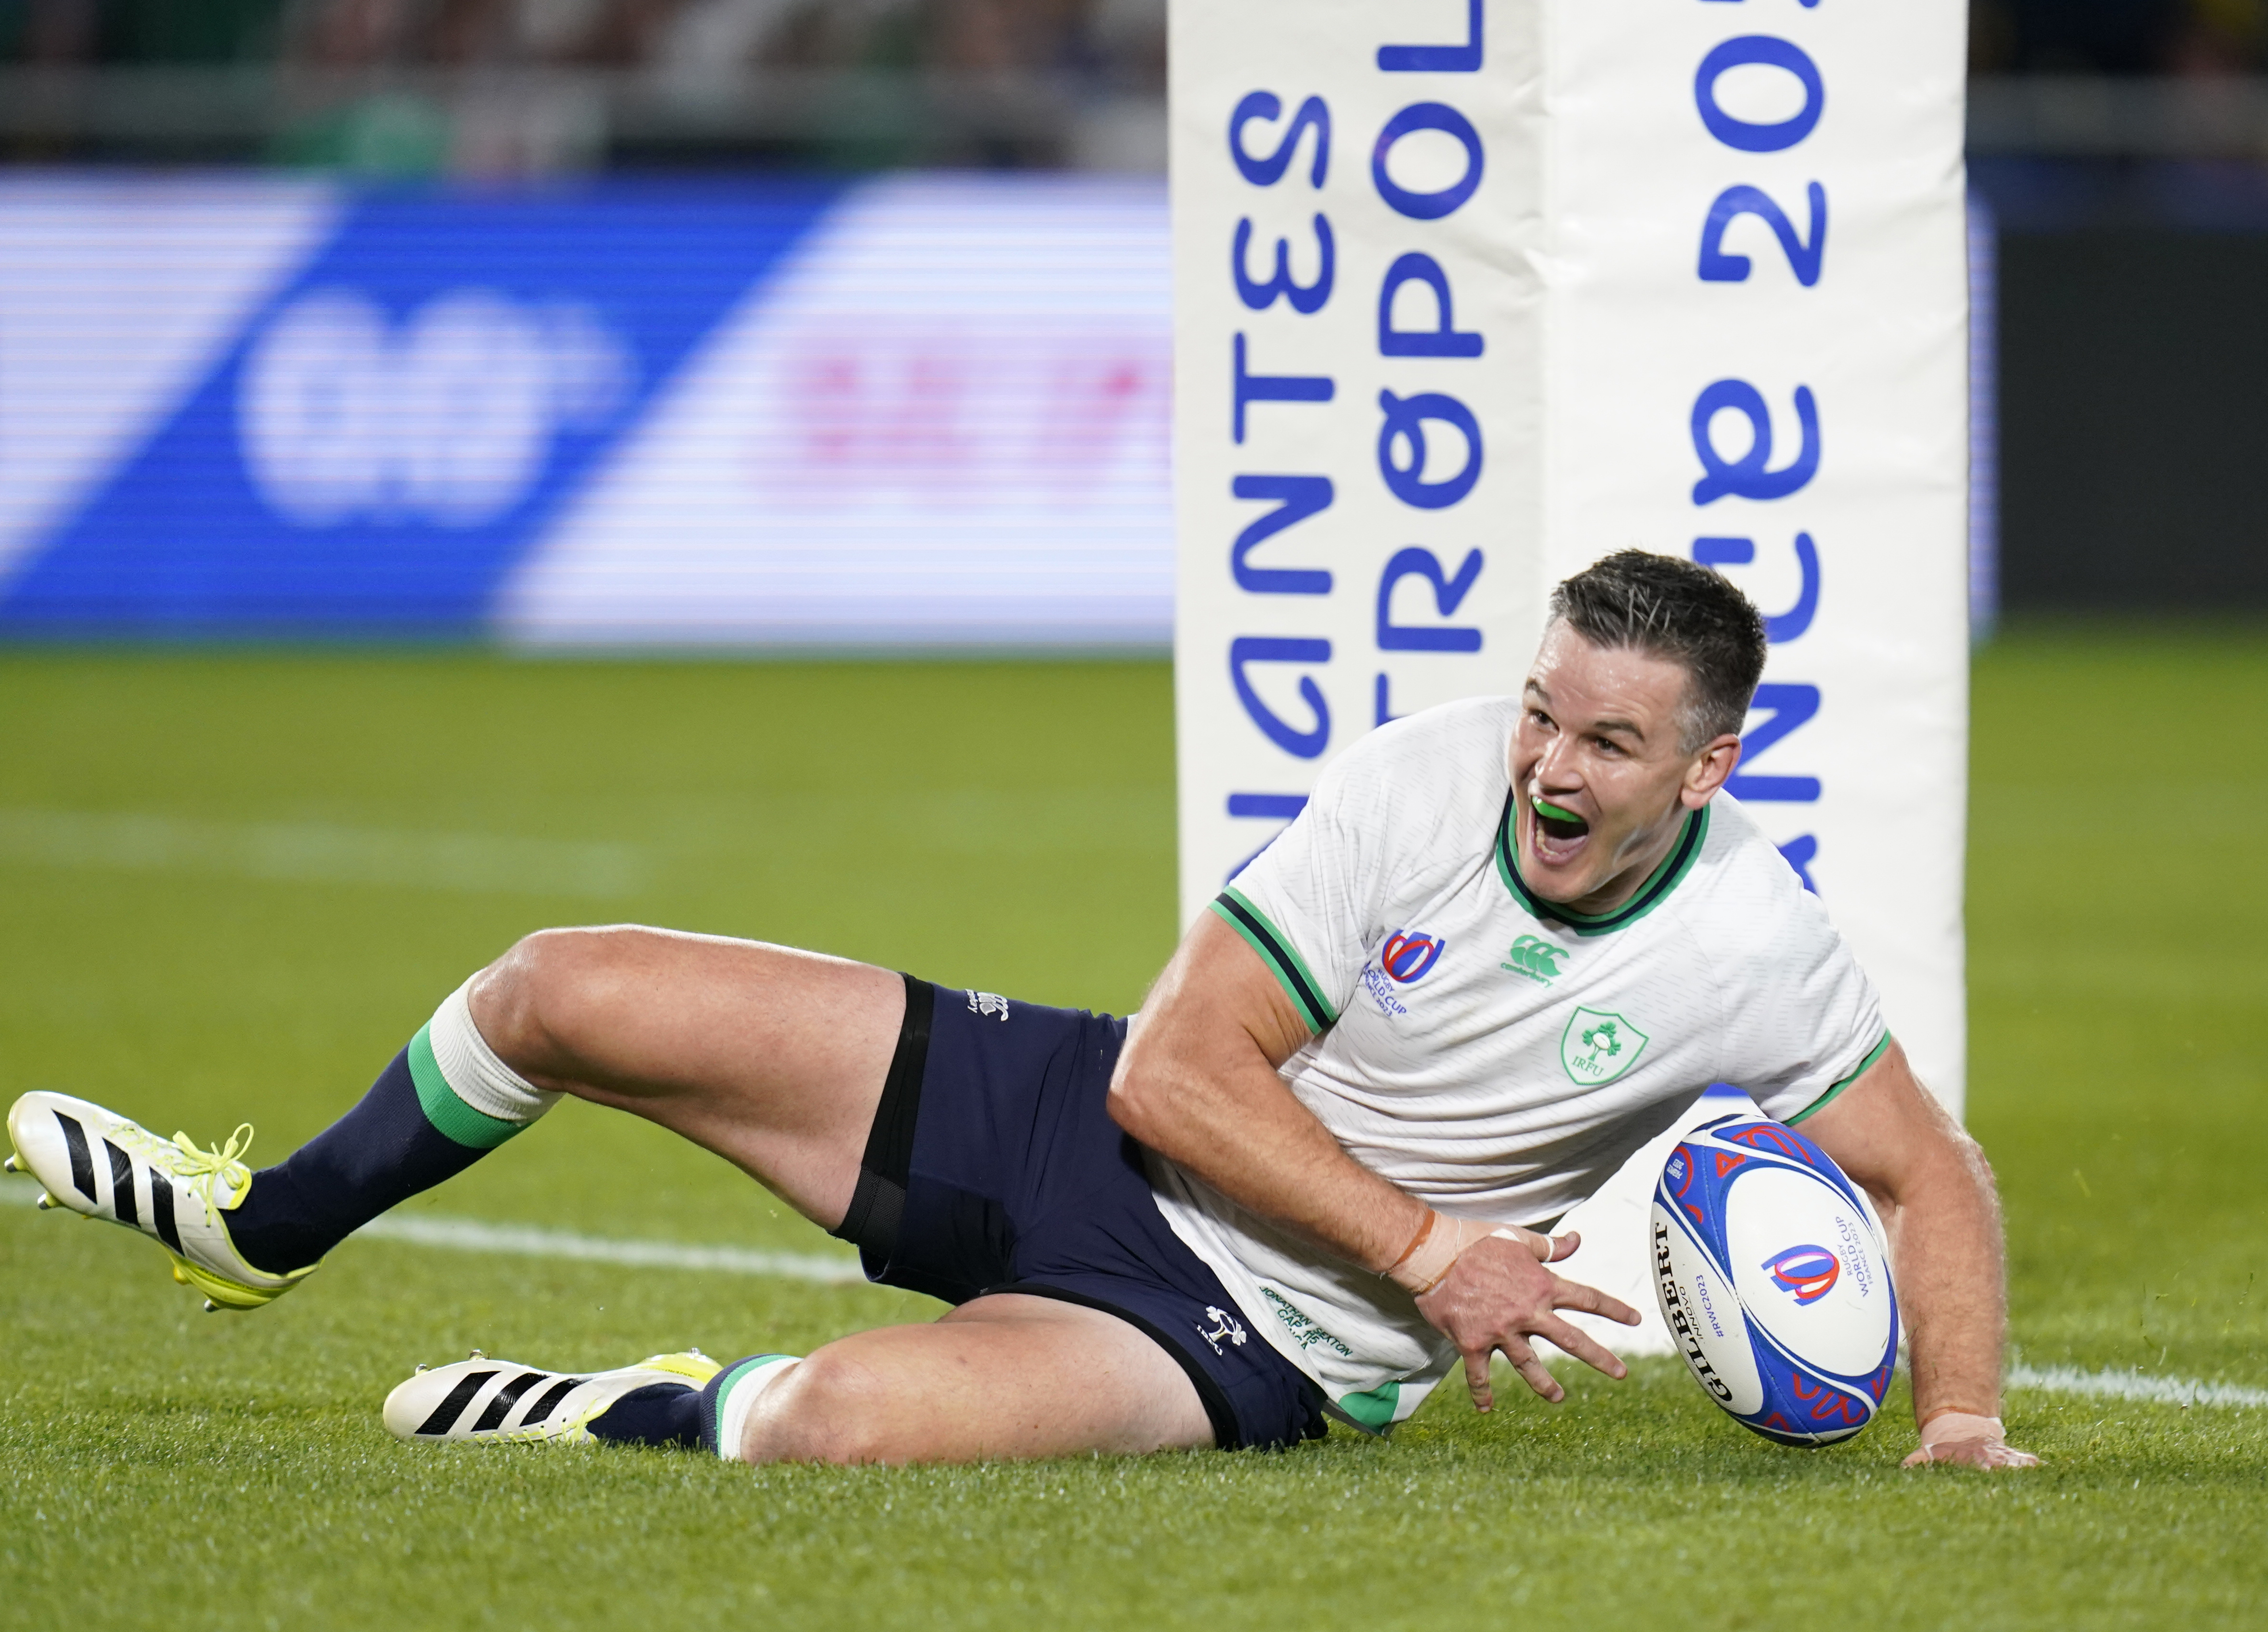 Sexton celebrated wildly after his try surpassed Ronan O'Gara's record